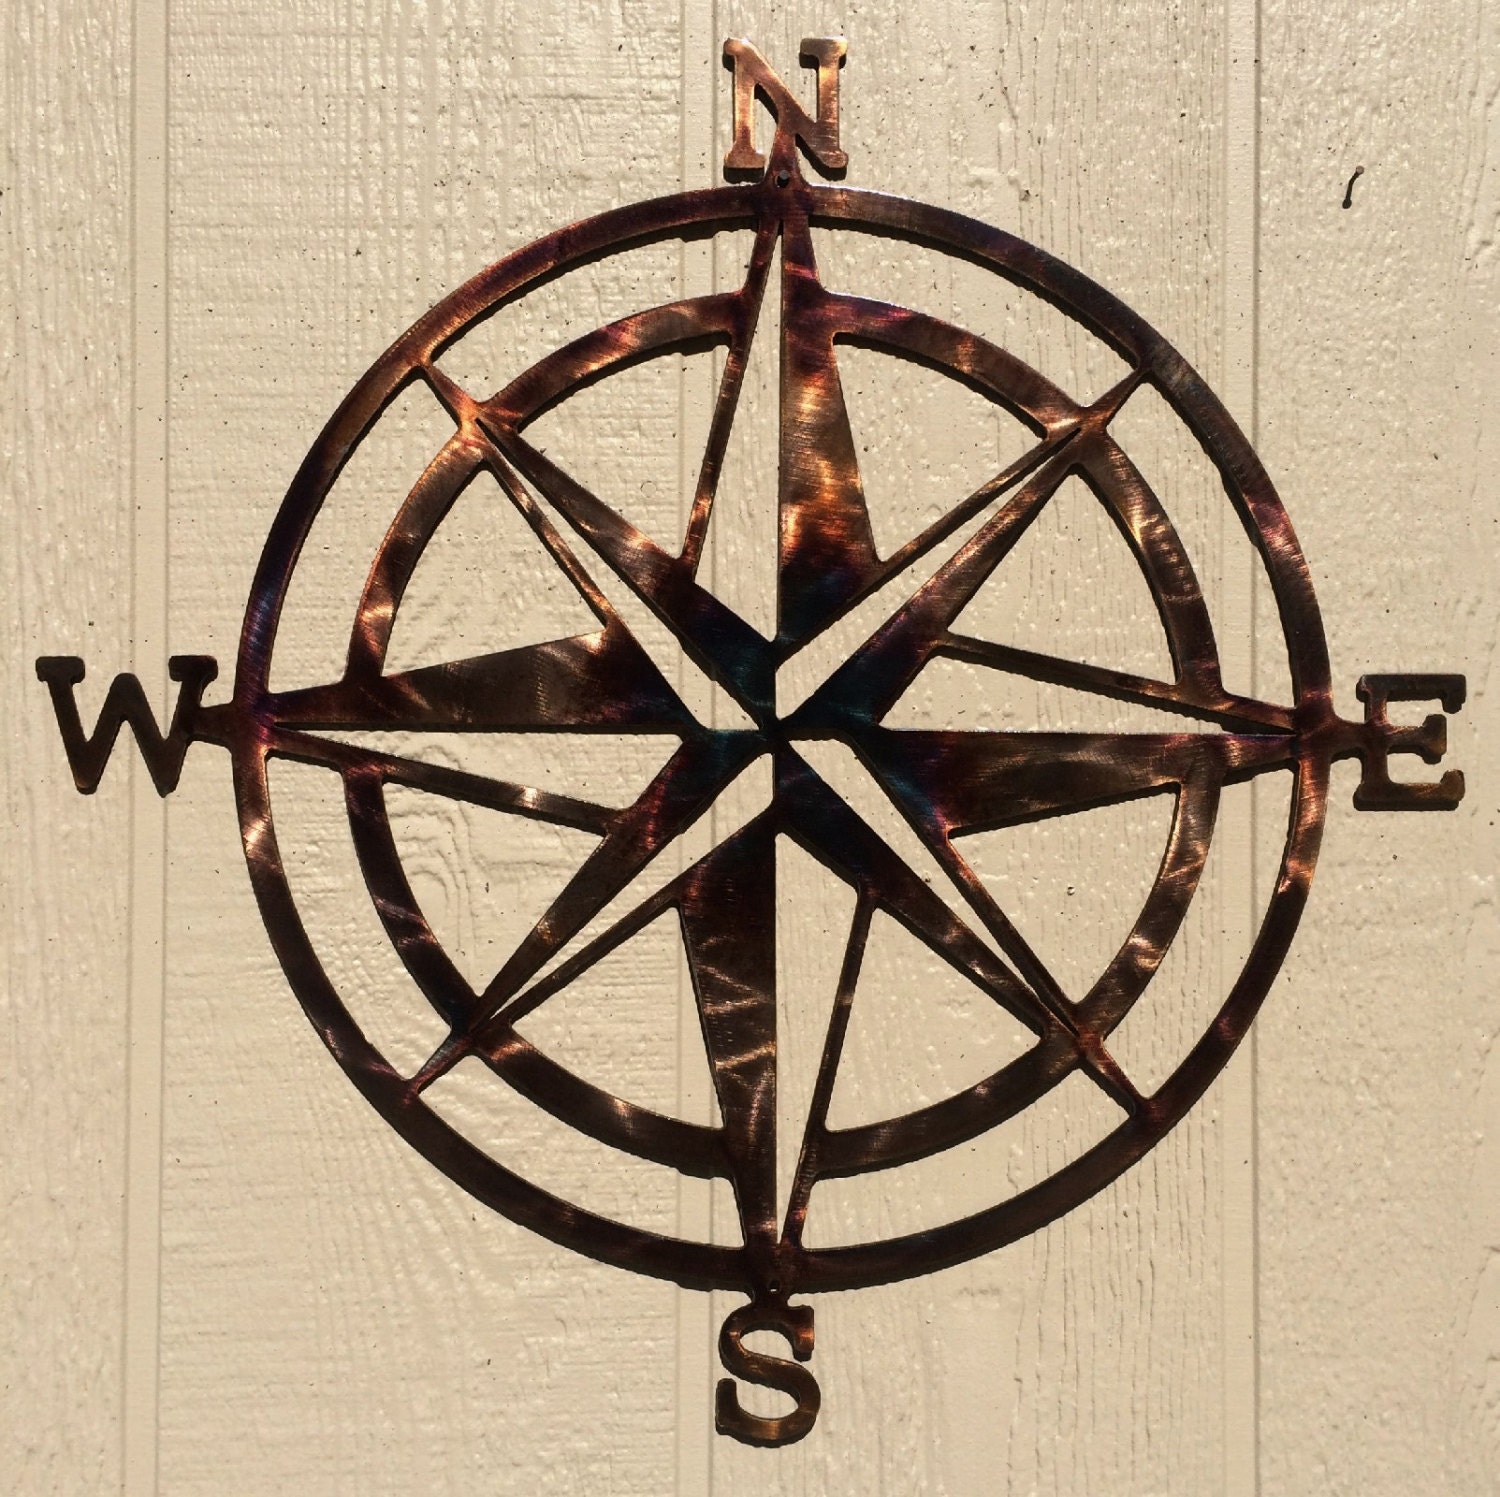 Details about   Nautical COMPASS ROSE  24"WALL ART DECOR copper/bronze plated 